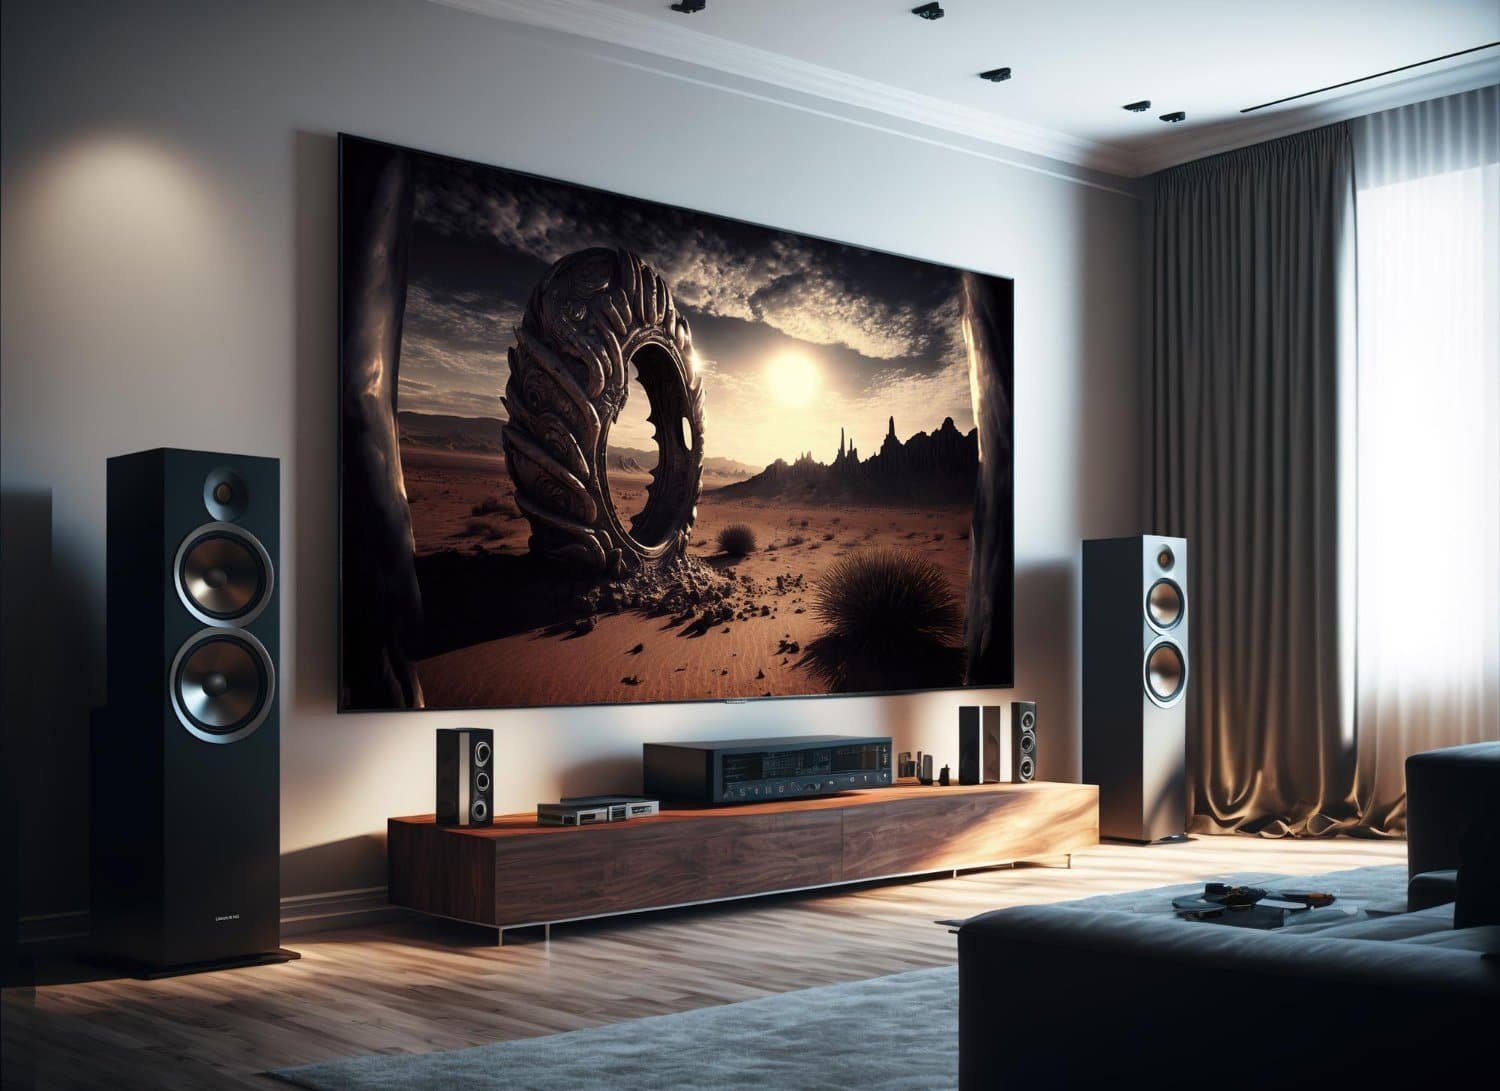 Setting Up the Ultimate Home Theater System